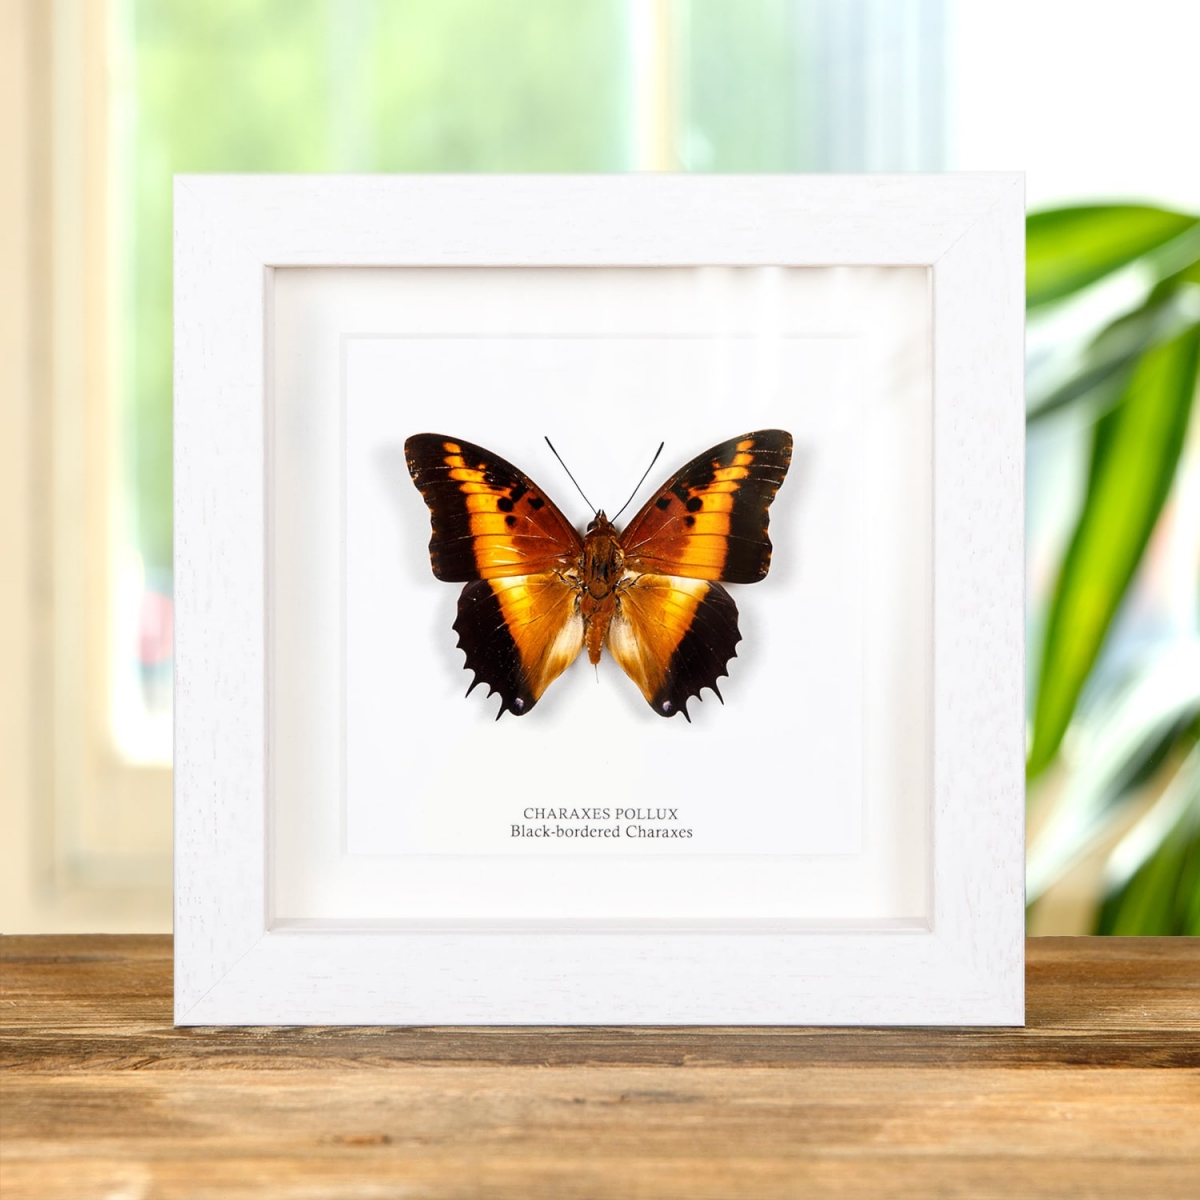 Black-bordered Charaxes In Box Frame (Charaxes pollux)